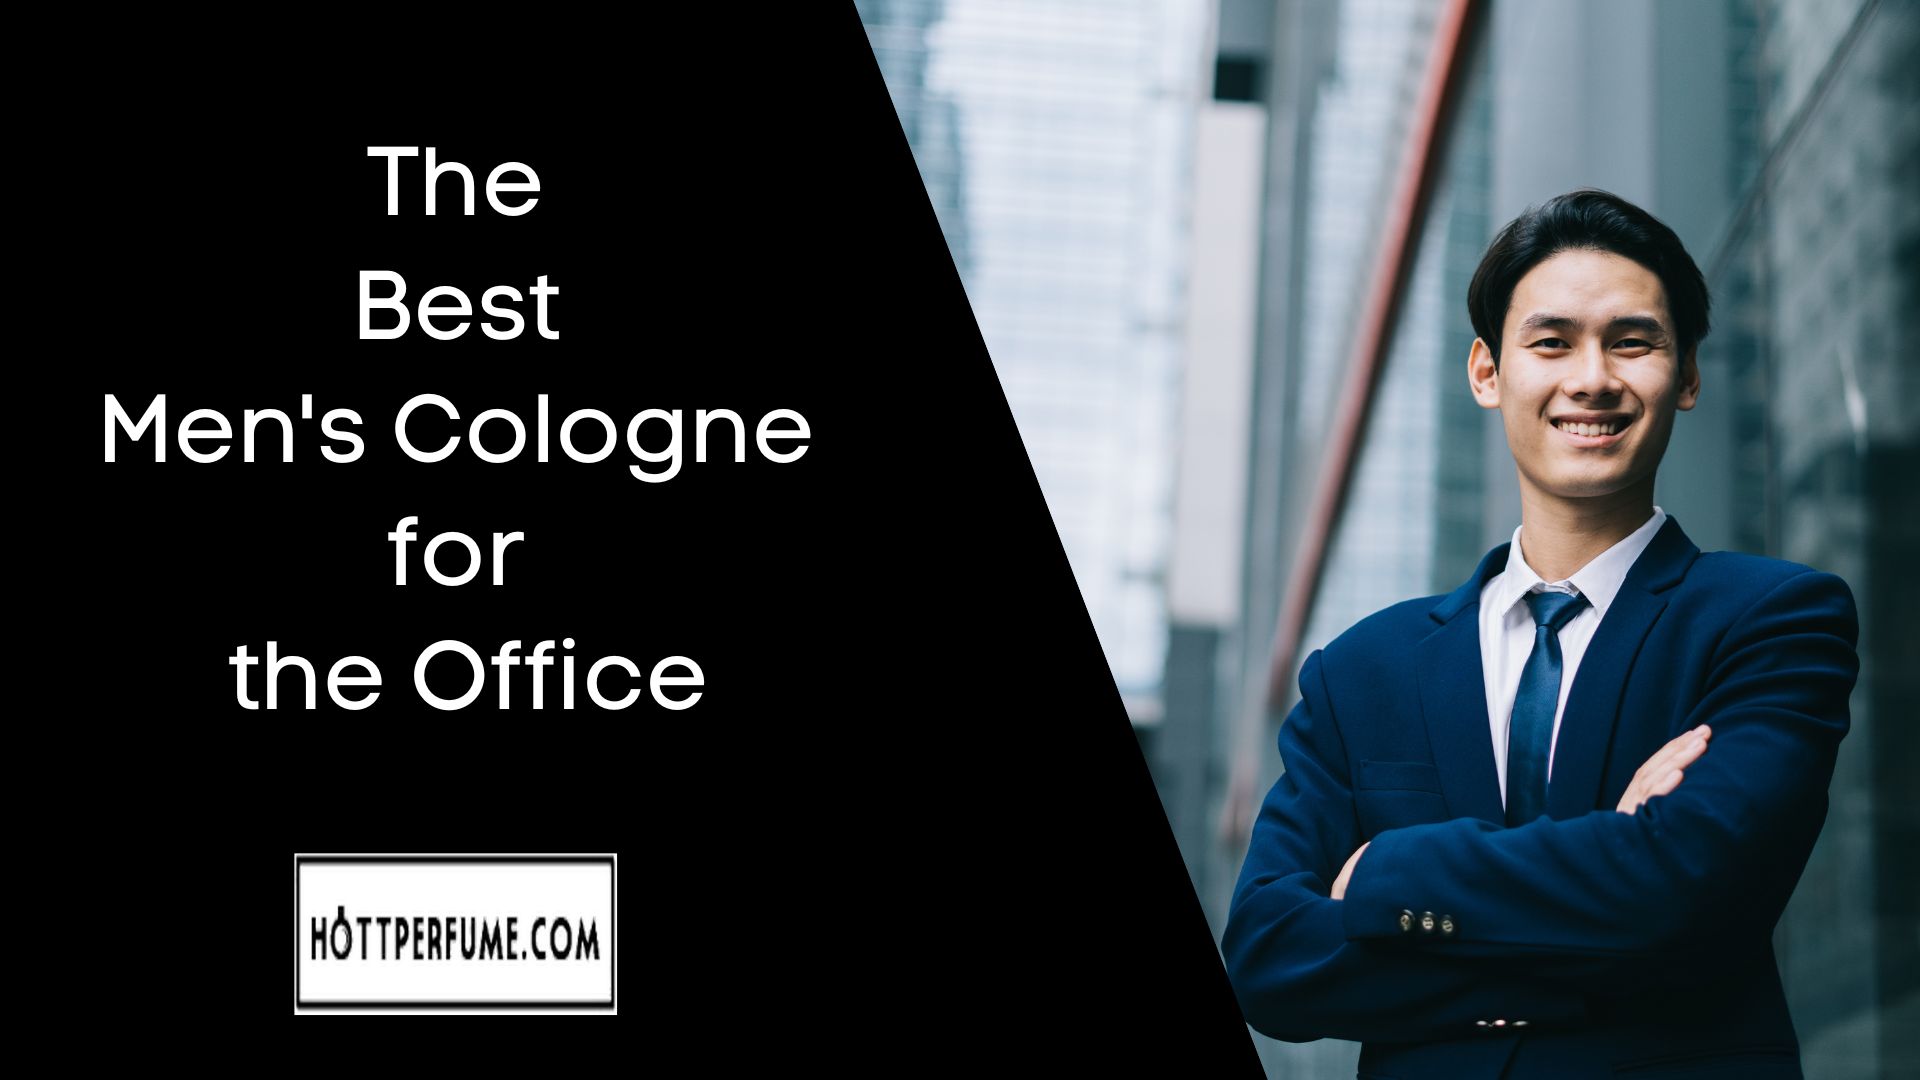 The Best Men's Cologne for the Office